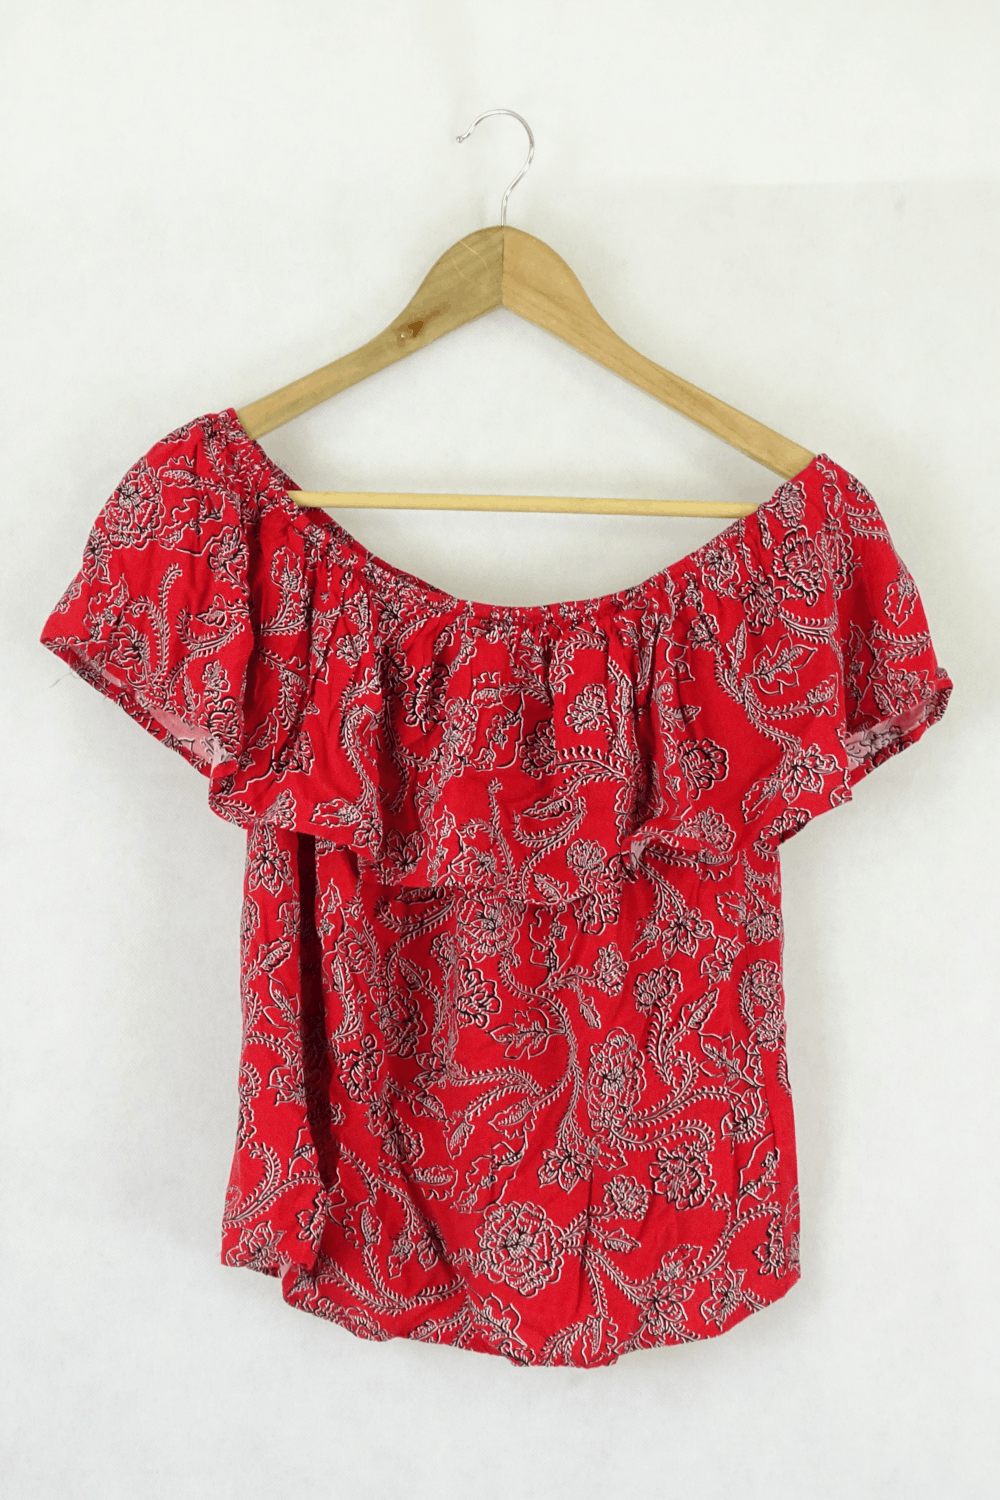 Bardot Red Floral Top 6